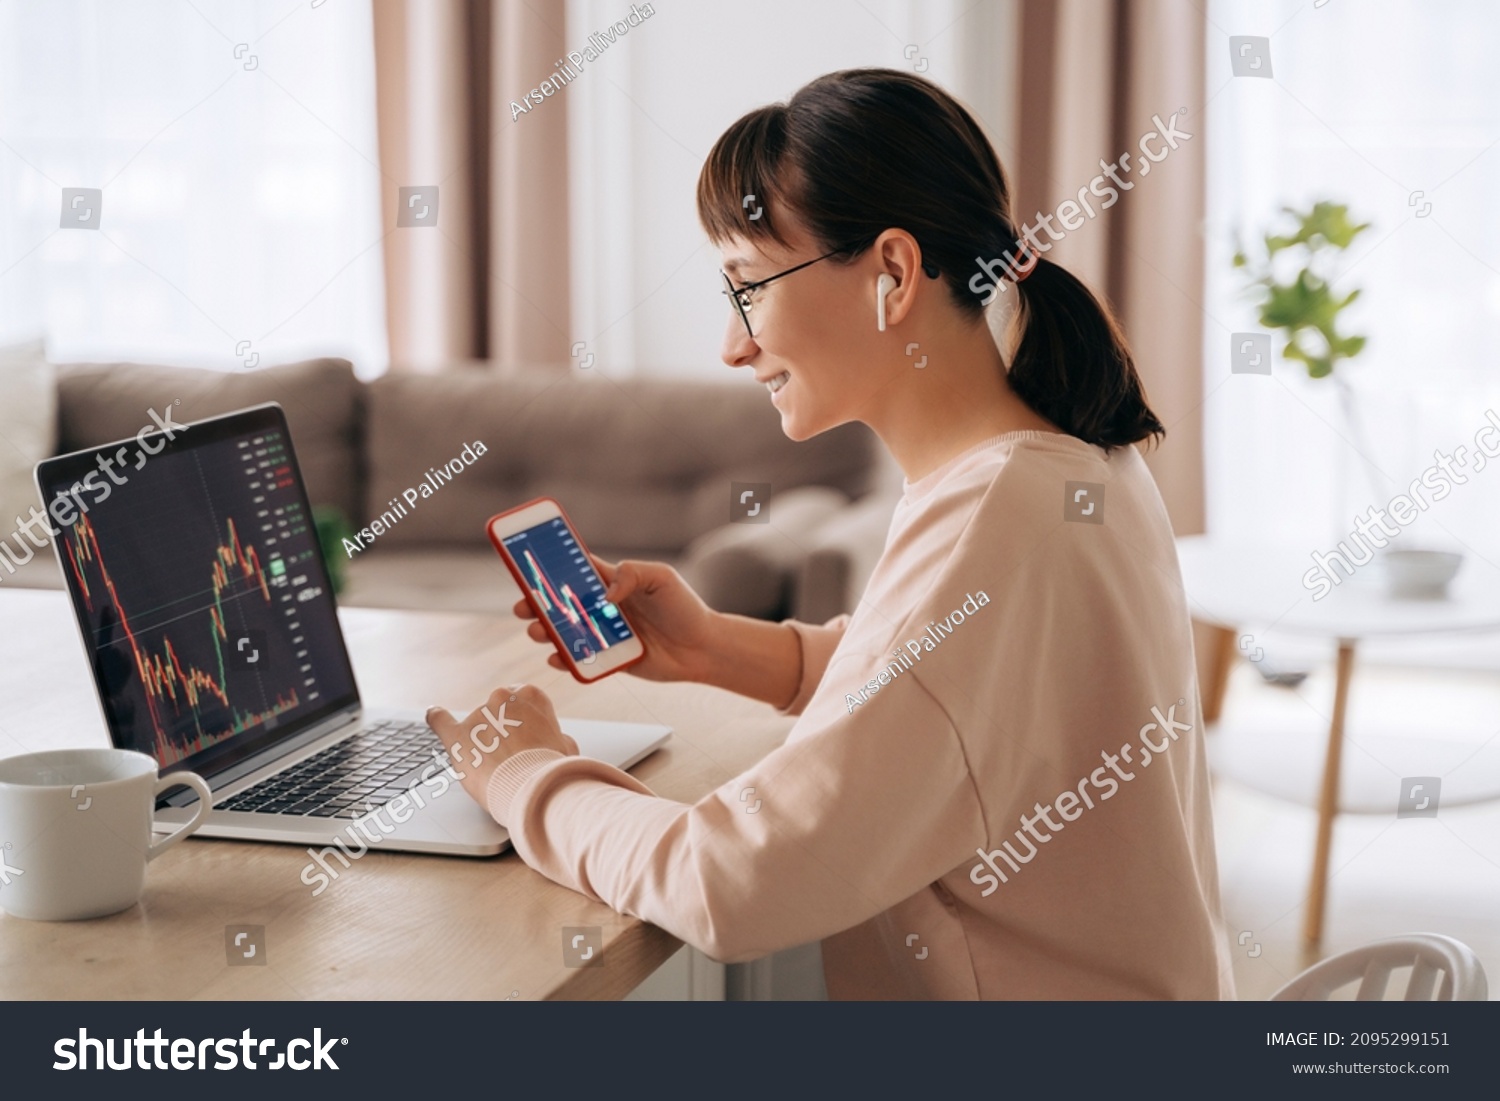 Smiling business woman trader analyst looking at laptop monitor, holding smartphone, wearing earphones. Investor broker analyzing indexes, trading online investment data on stock market graph at home #2095299151